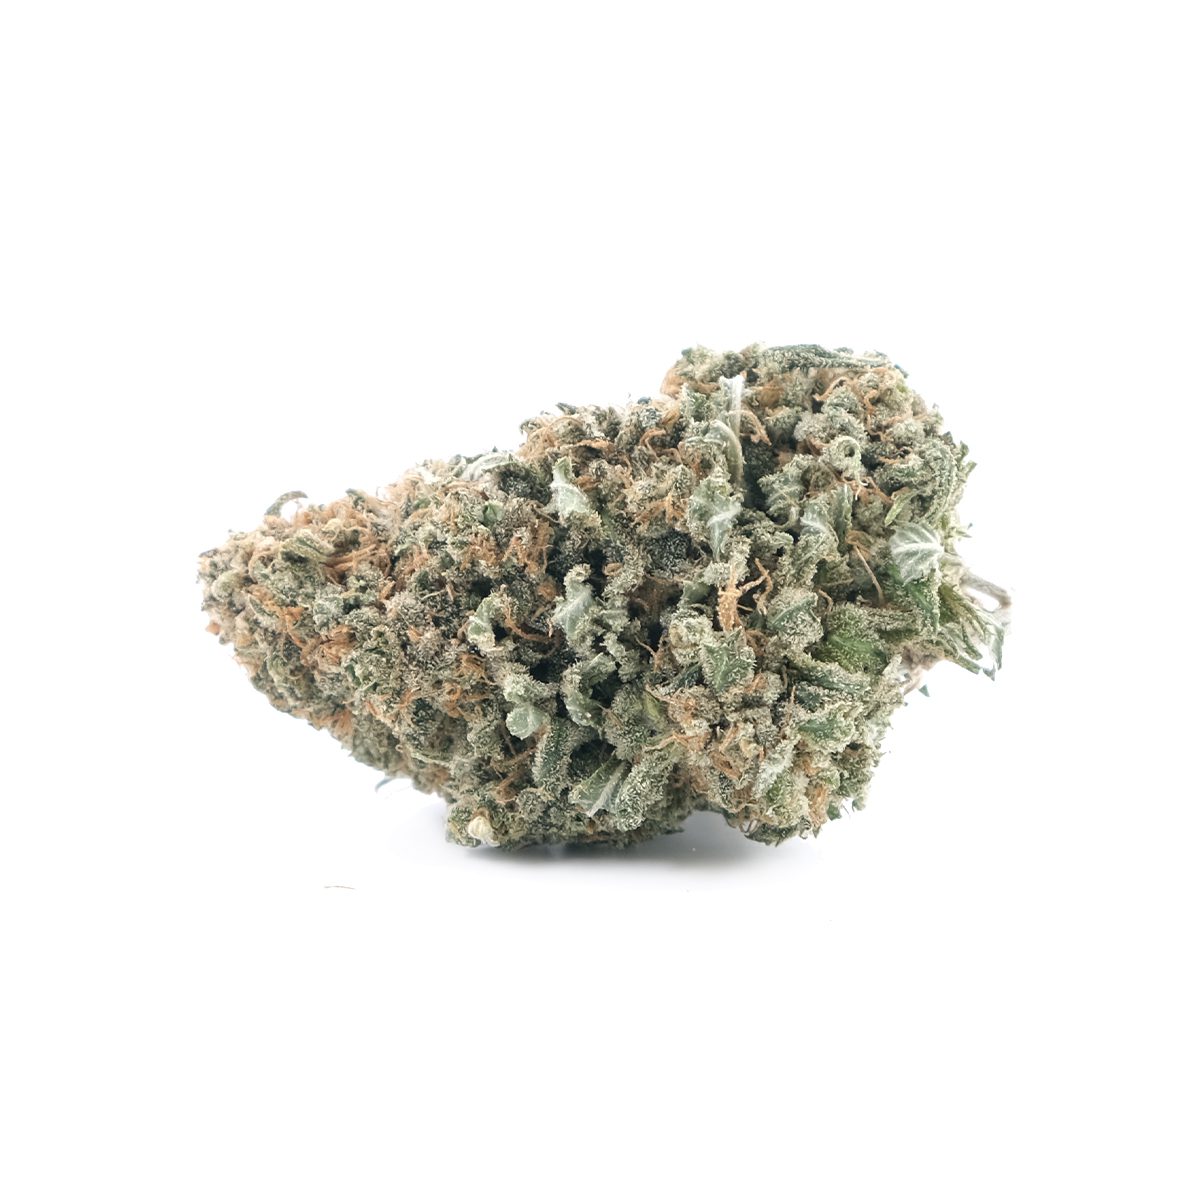 Pineberry AAA Indica Dominant Hybrid Ounce Deal